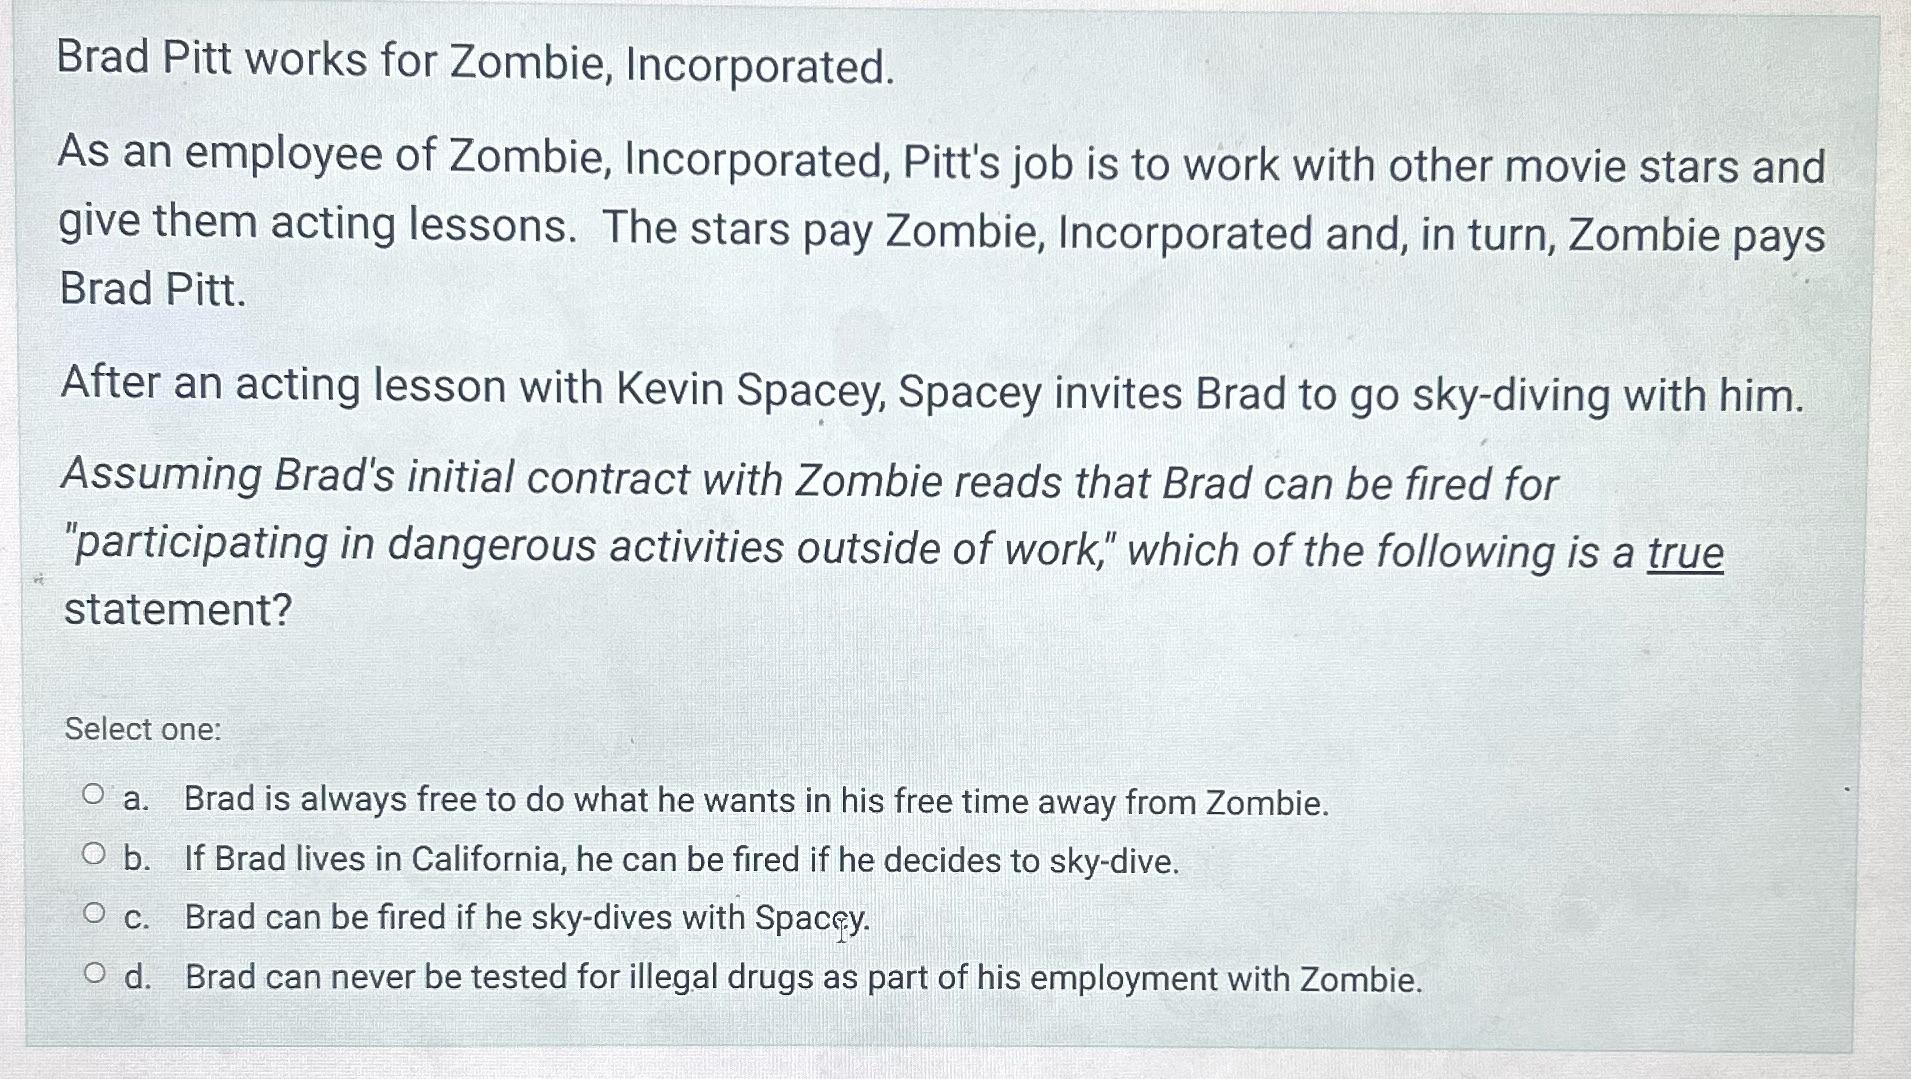 Brad Pitt works for Zombie, Incorporated. As an employee of Zombie, Incorporated, Pitt's job is to work with